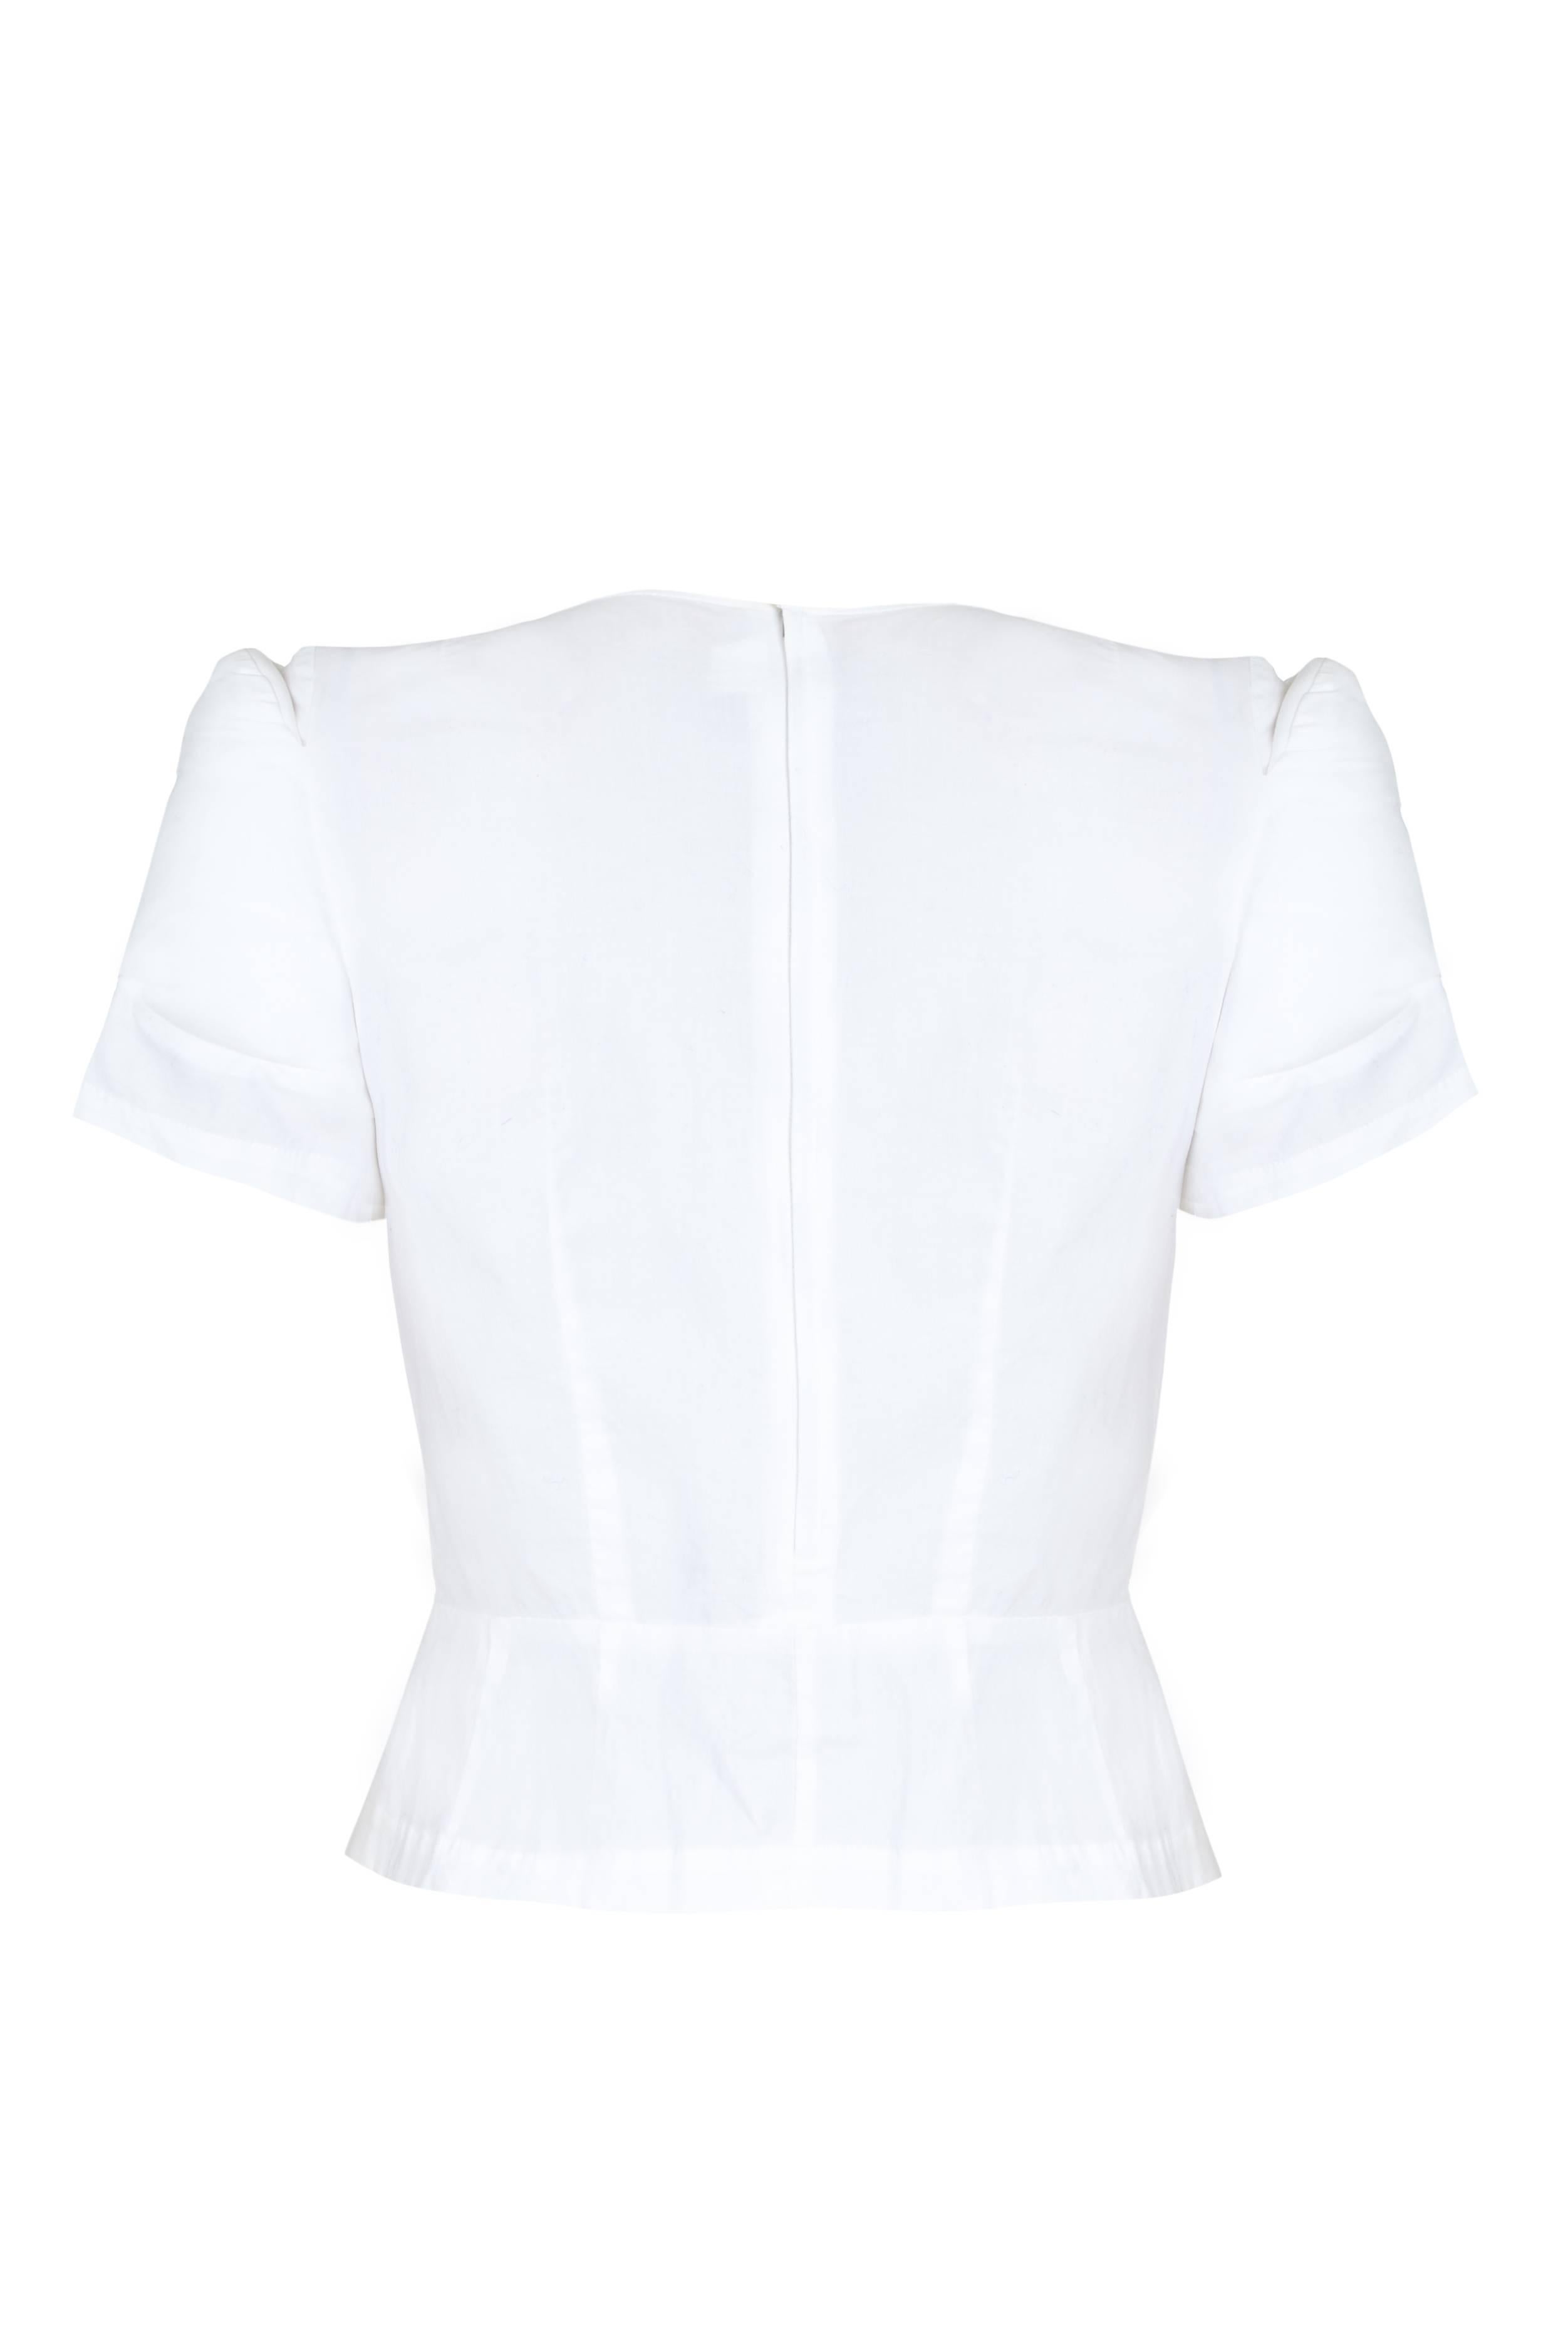 White cotton top by Comme des Garcon with removable padded sections. Fastens at the back and side with zips and is in excellent condition.  Labeled size Medium which is the equivalent of about a UK 12, US 8.